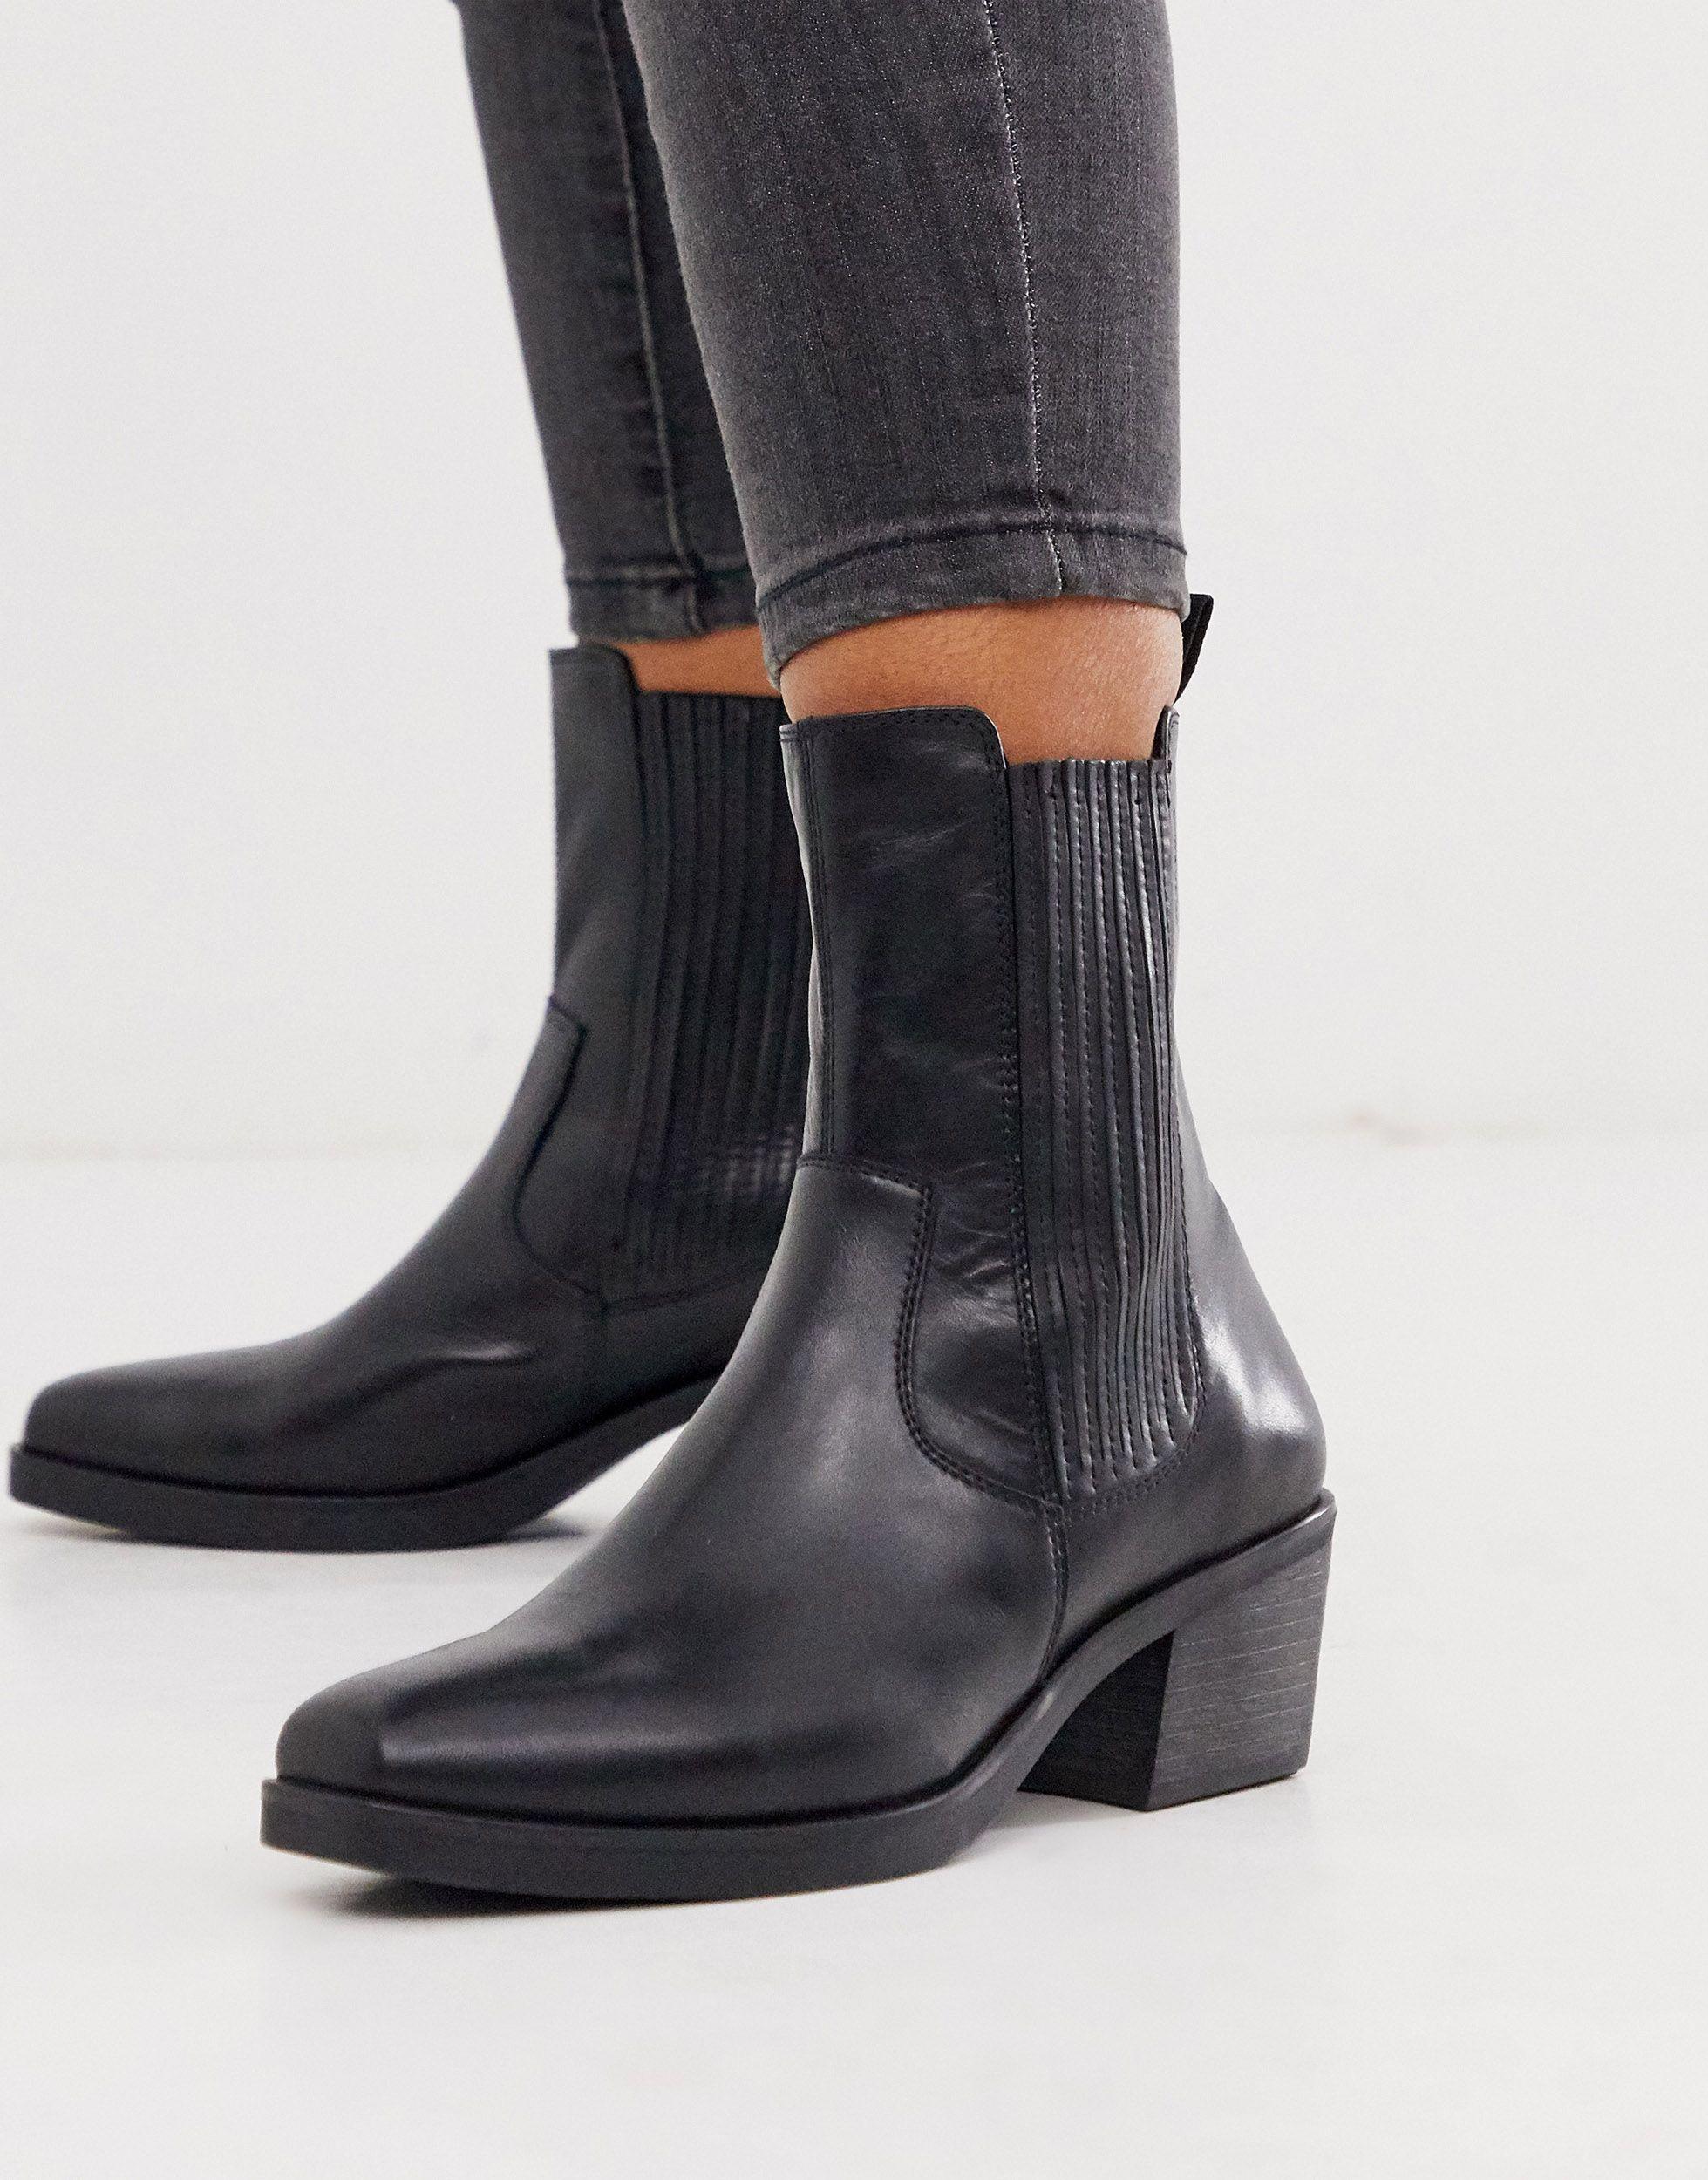 Vagabond Shoemakers Simone Leather Western Mid Heeled Ankle Boots With Square Toe in Black Lyst